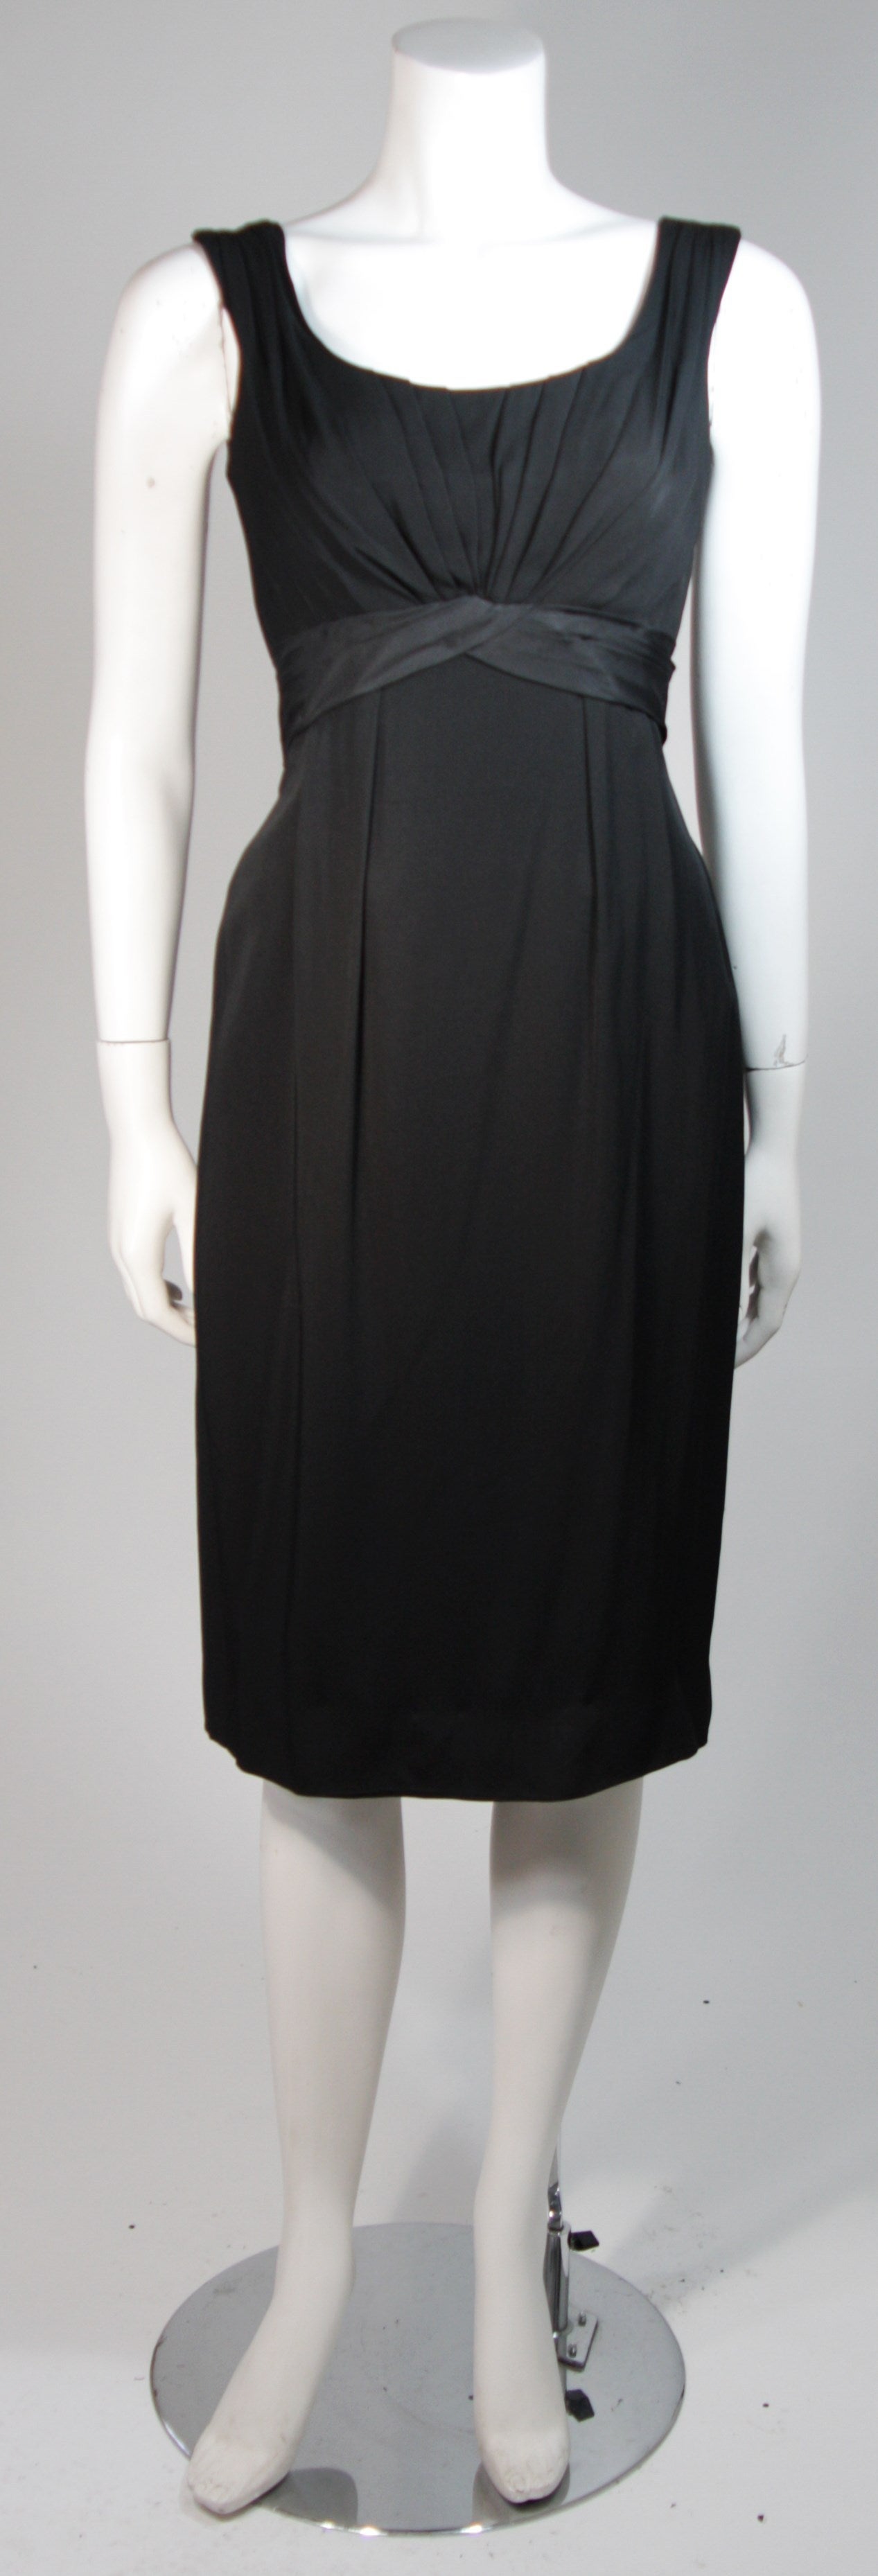 This Ceil Chapman cocktail dress is composed of a black silk. The dress features draping at the center front and a center back zipper. There is a sash detail at the center back waist. In excellent vintage condition. Beautiful for design inspiration.